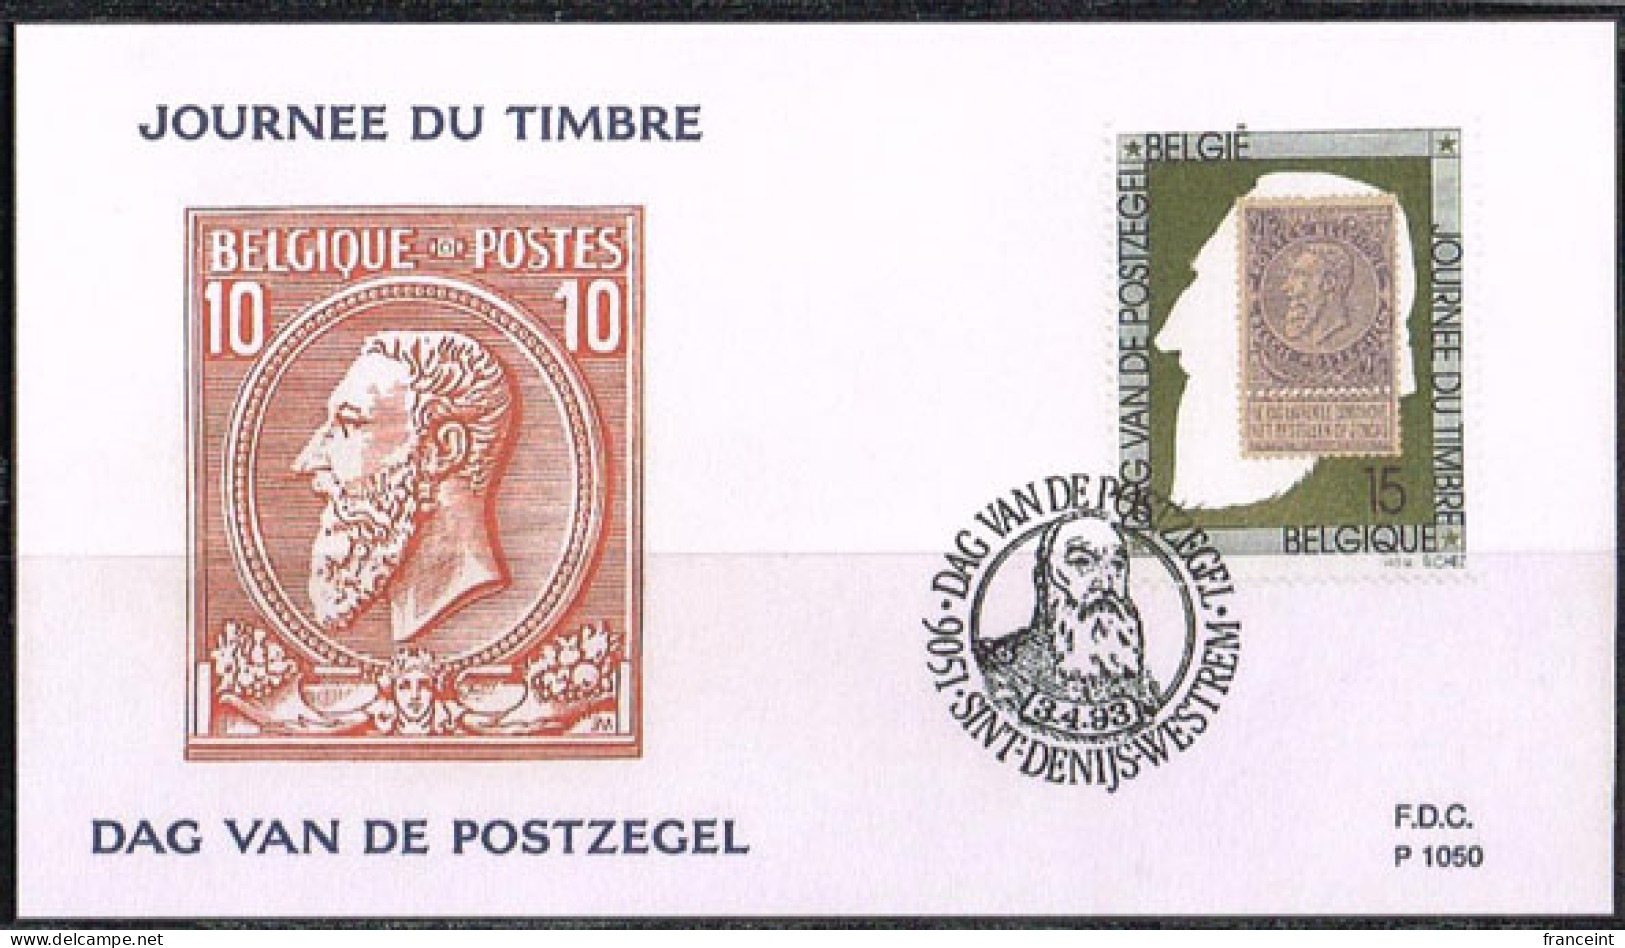 BELGIUM(1993) Old Leopold Stamp. Die Proof In Black Signed By The Engraver, Representing The FDC Cachet. Scott 1582 - Proofs & Reprints